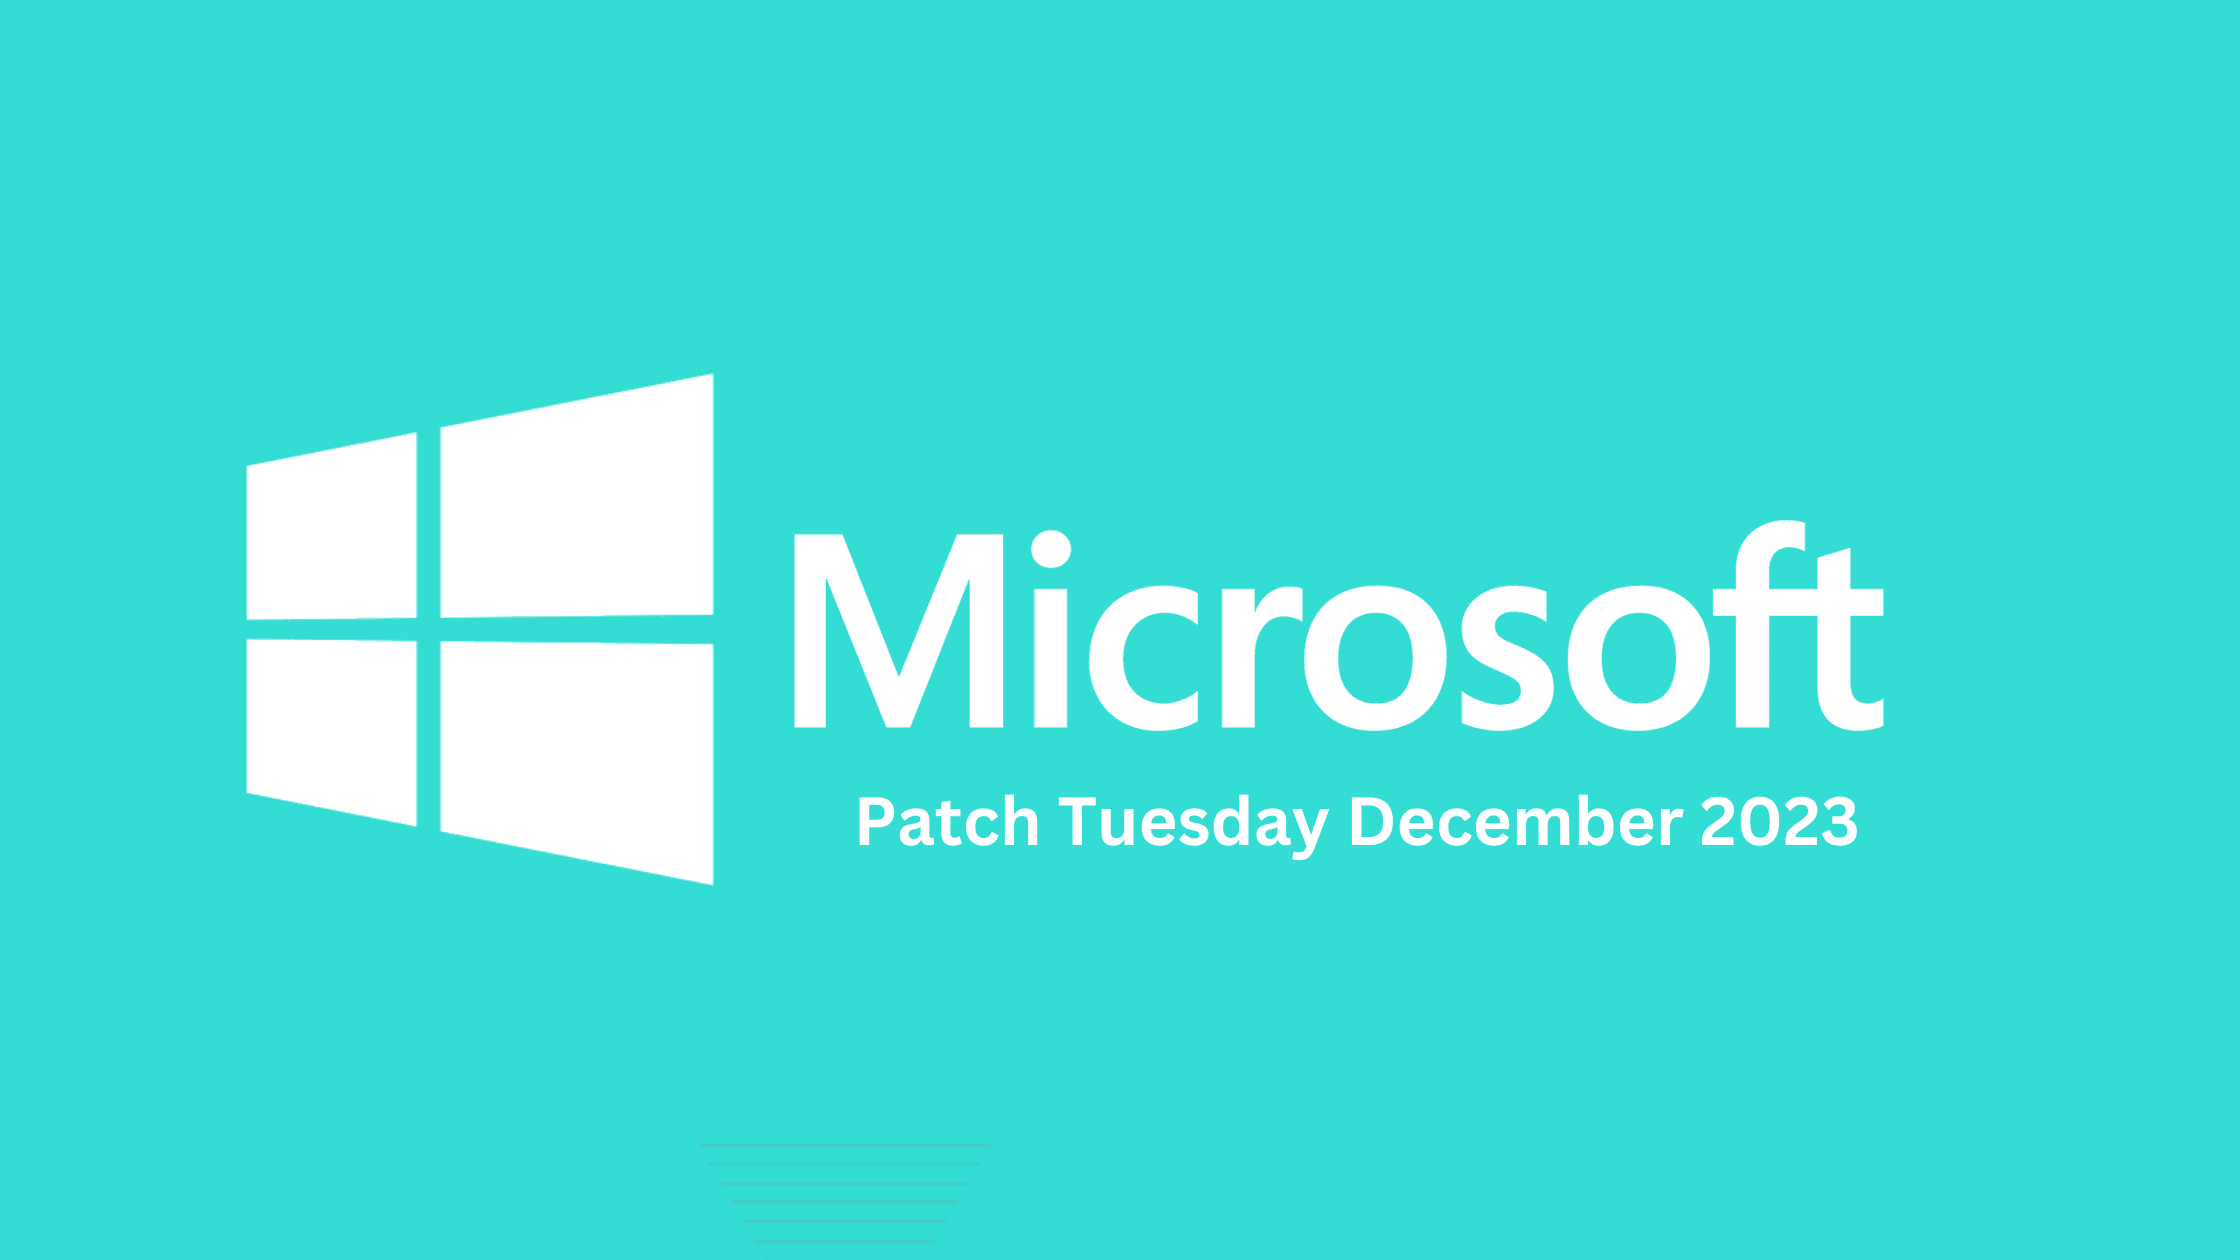 Breaking Down The Latest December 2023 Patch Tuesday Report